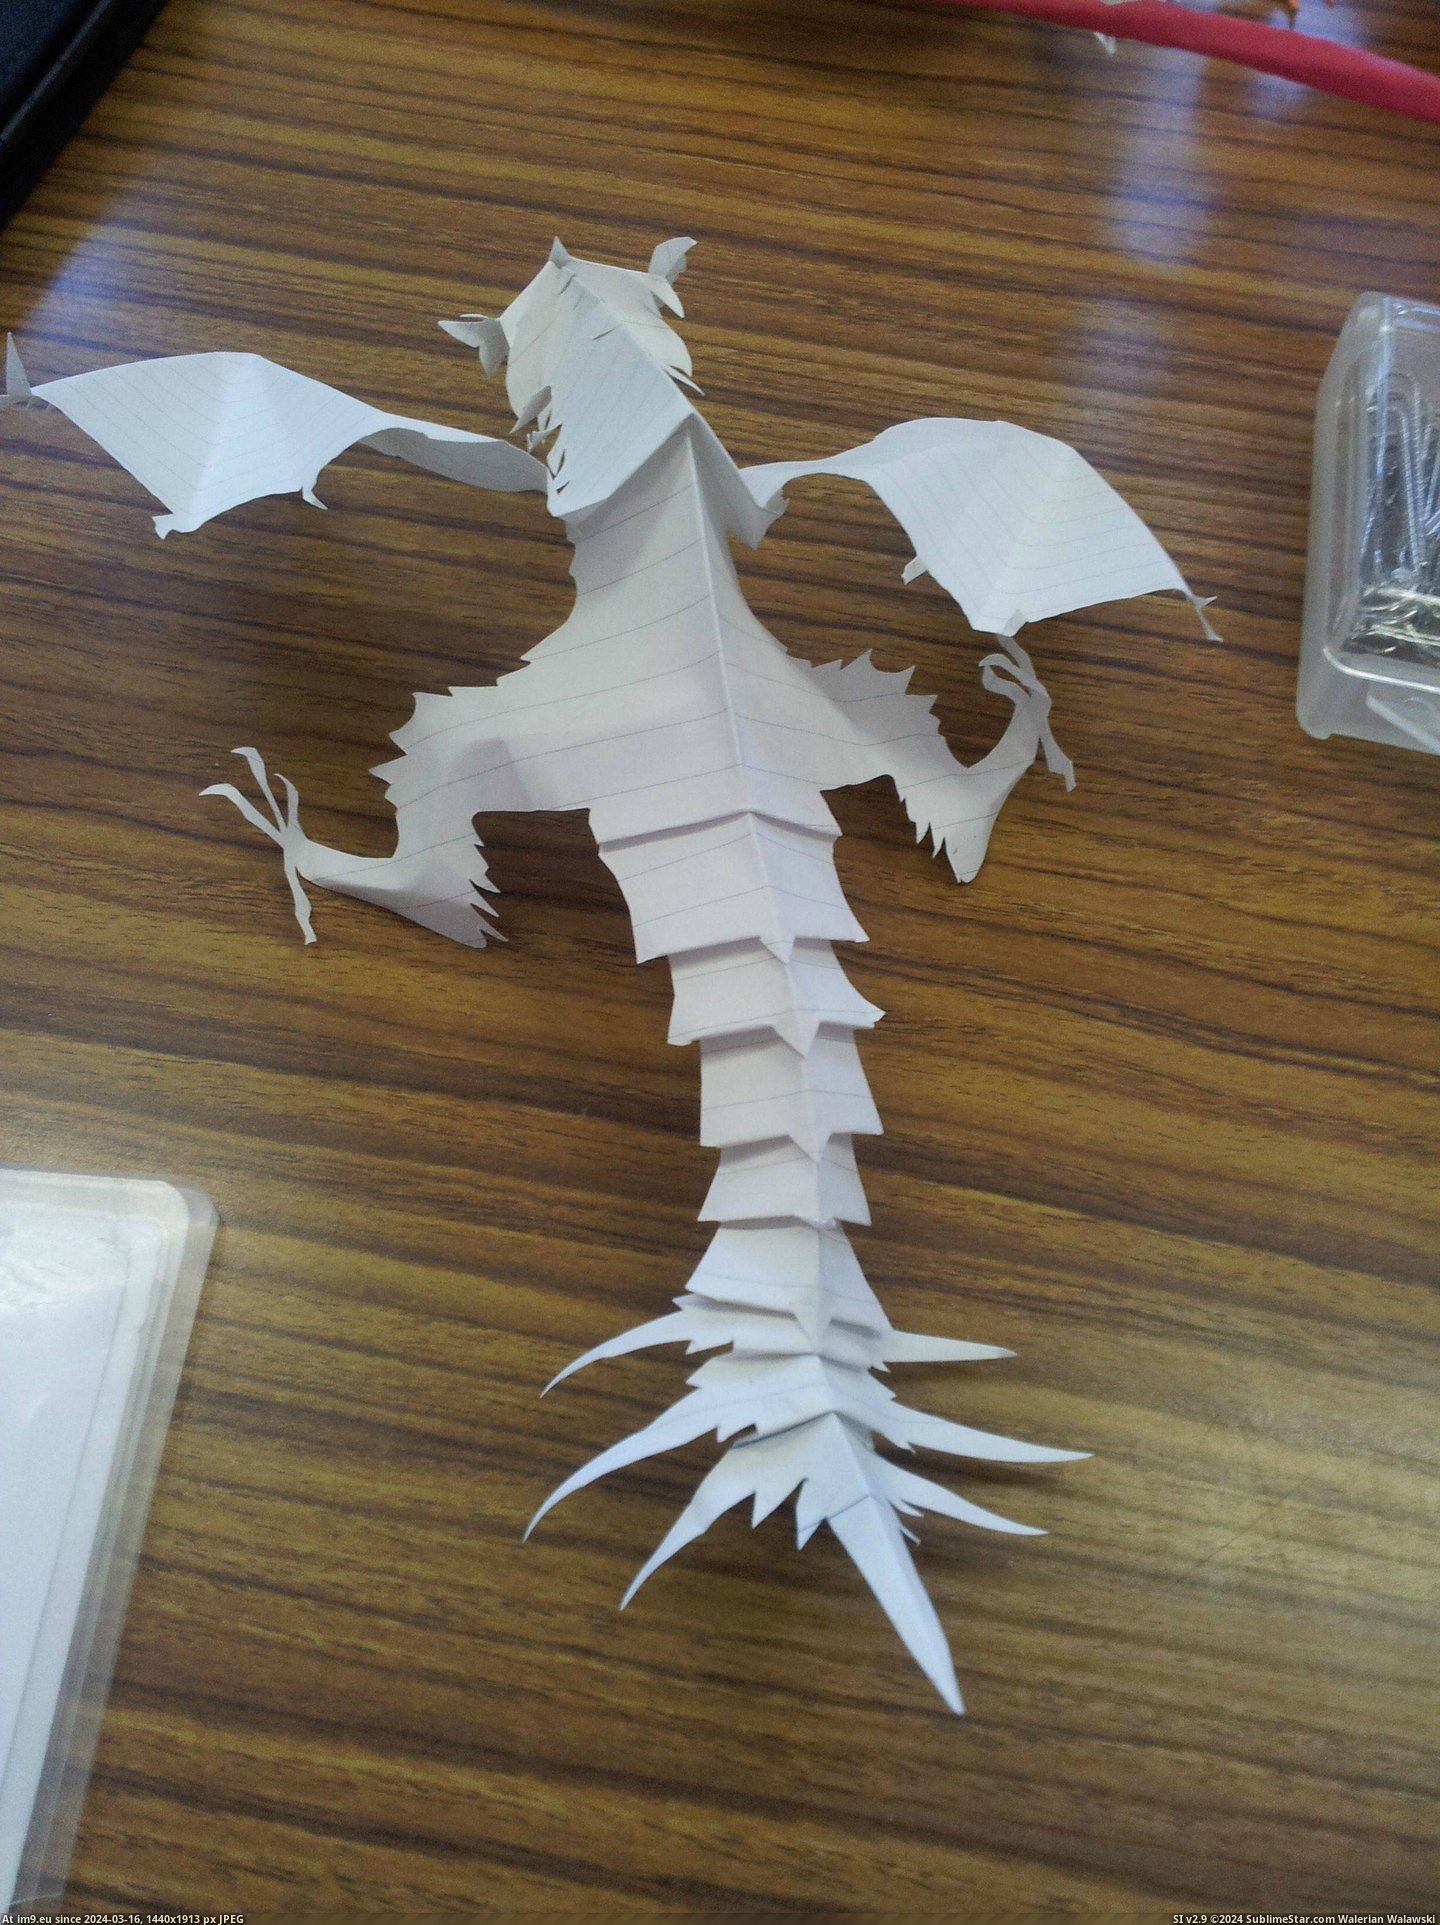 #One #Paper #Students #Creatures #Freehand #Bored #Completely [Pics] One of my students makes these creatures out of paper completely freehand whenever he is bored 2 Pic. (Изображение из альбом My r/PICS favs))